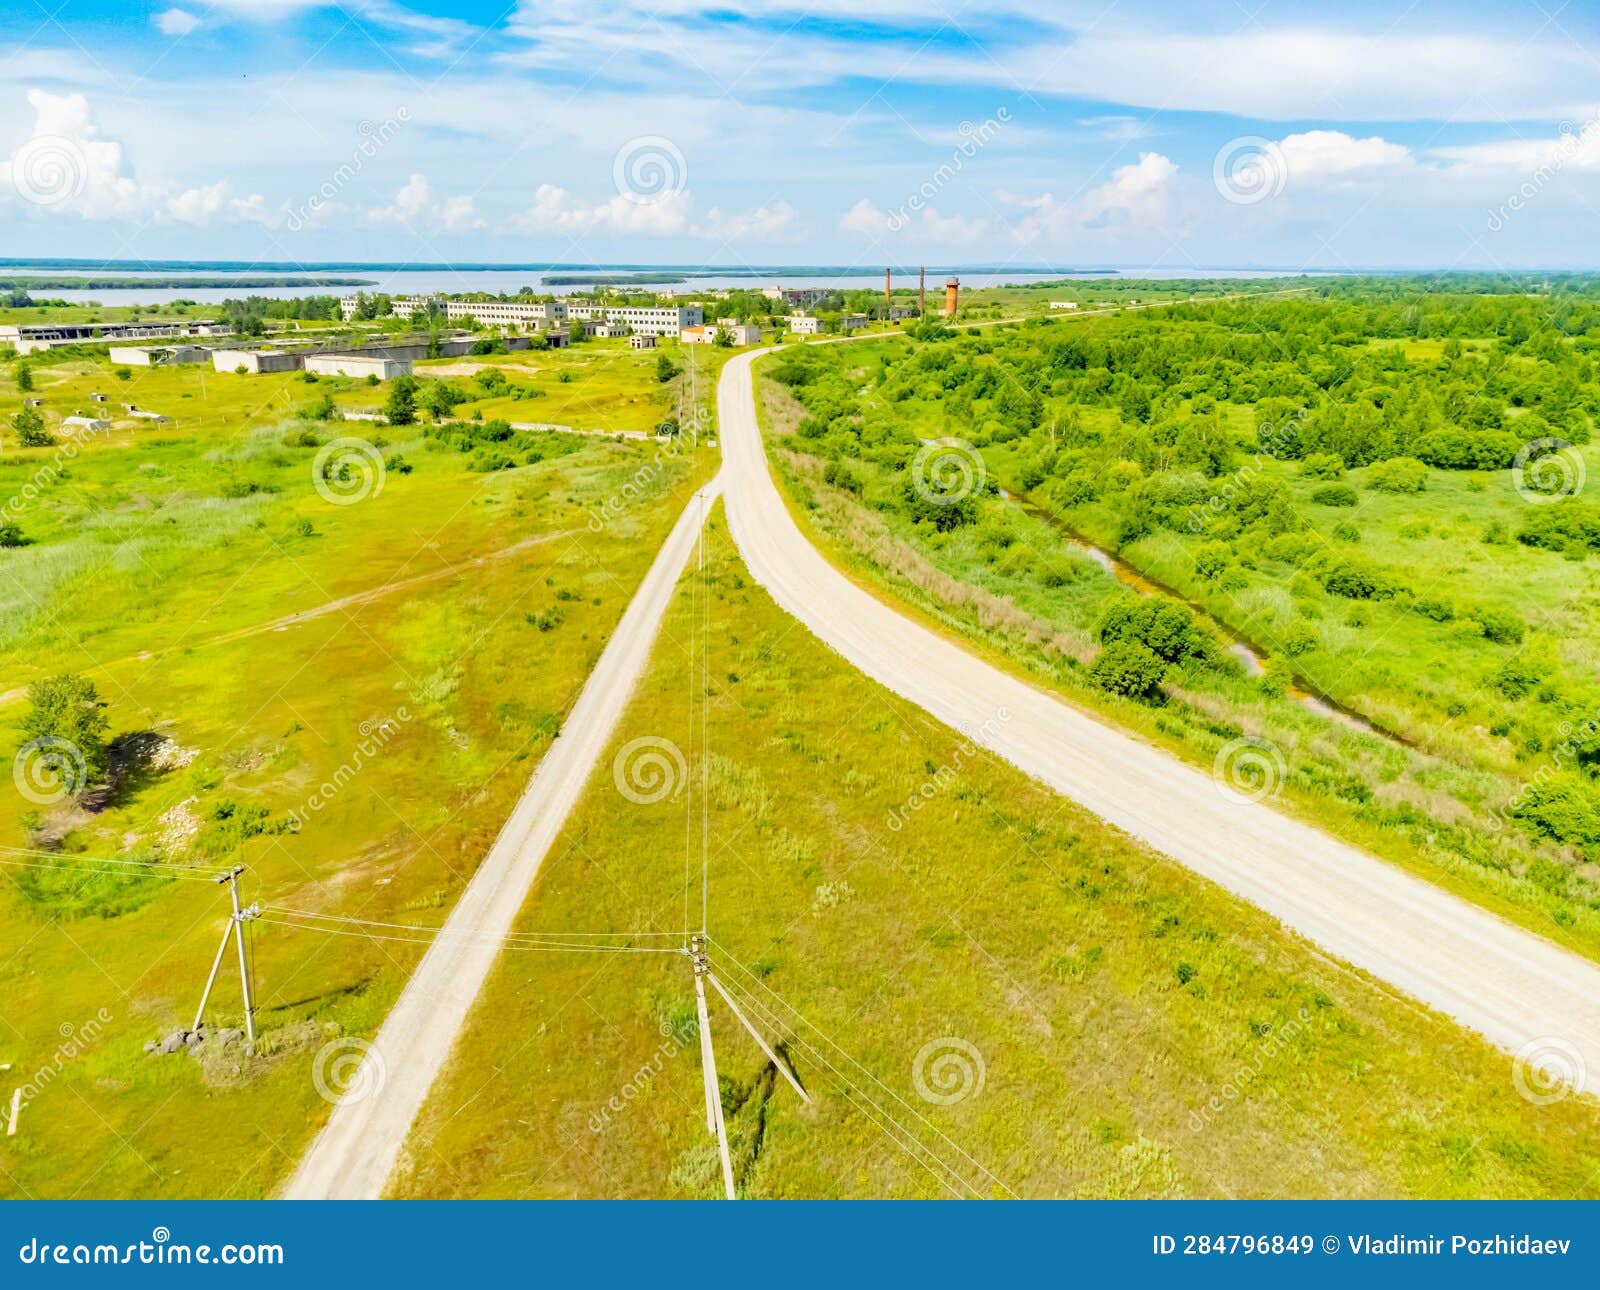 Photos of the River Island Were Taken from a Drone. Stock Image - Image ...